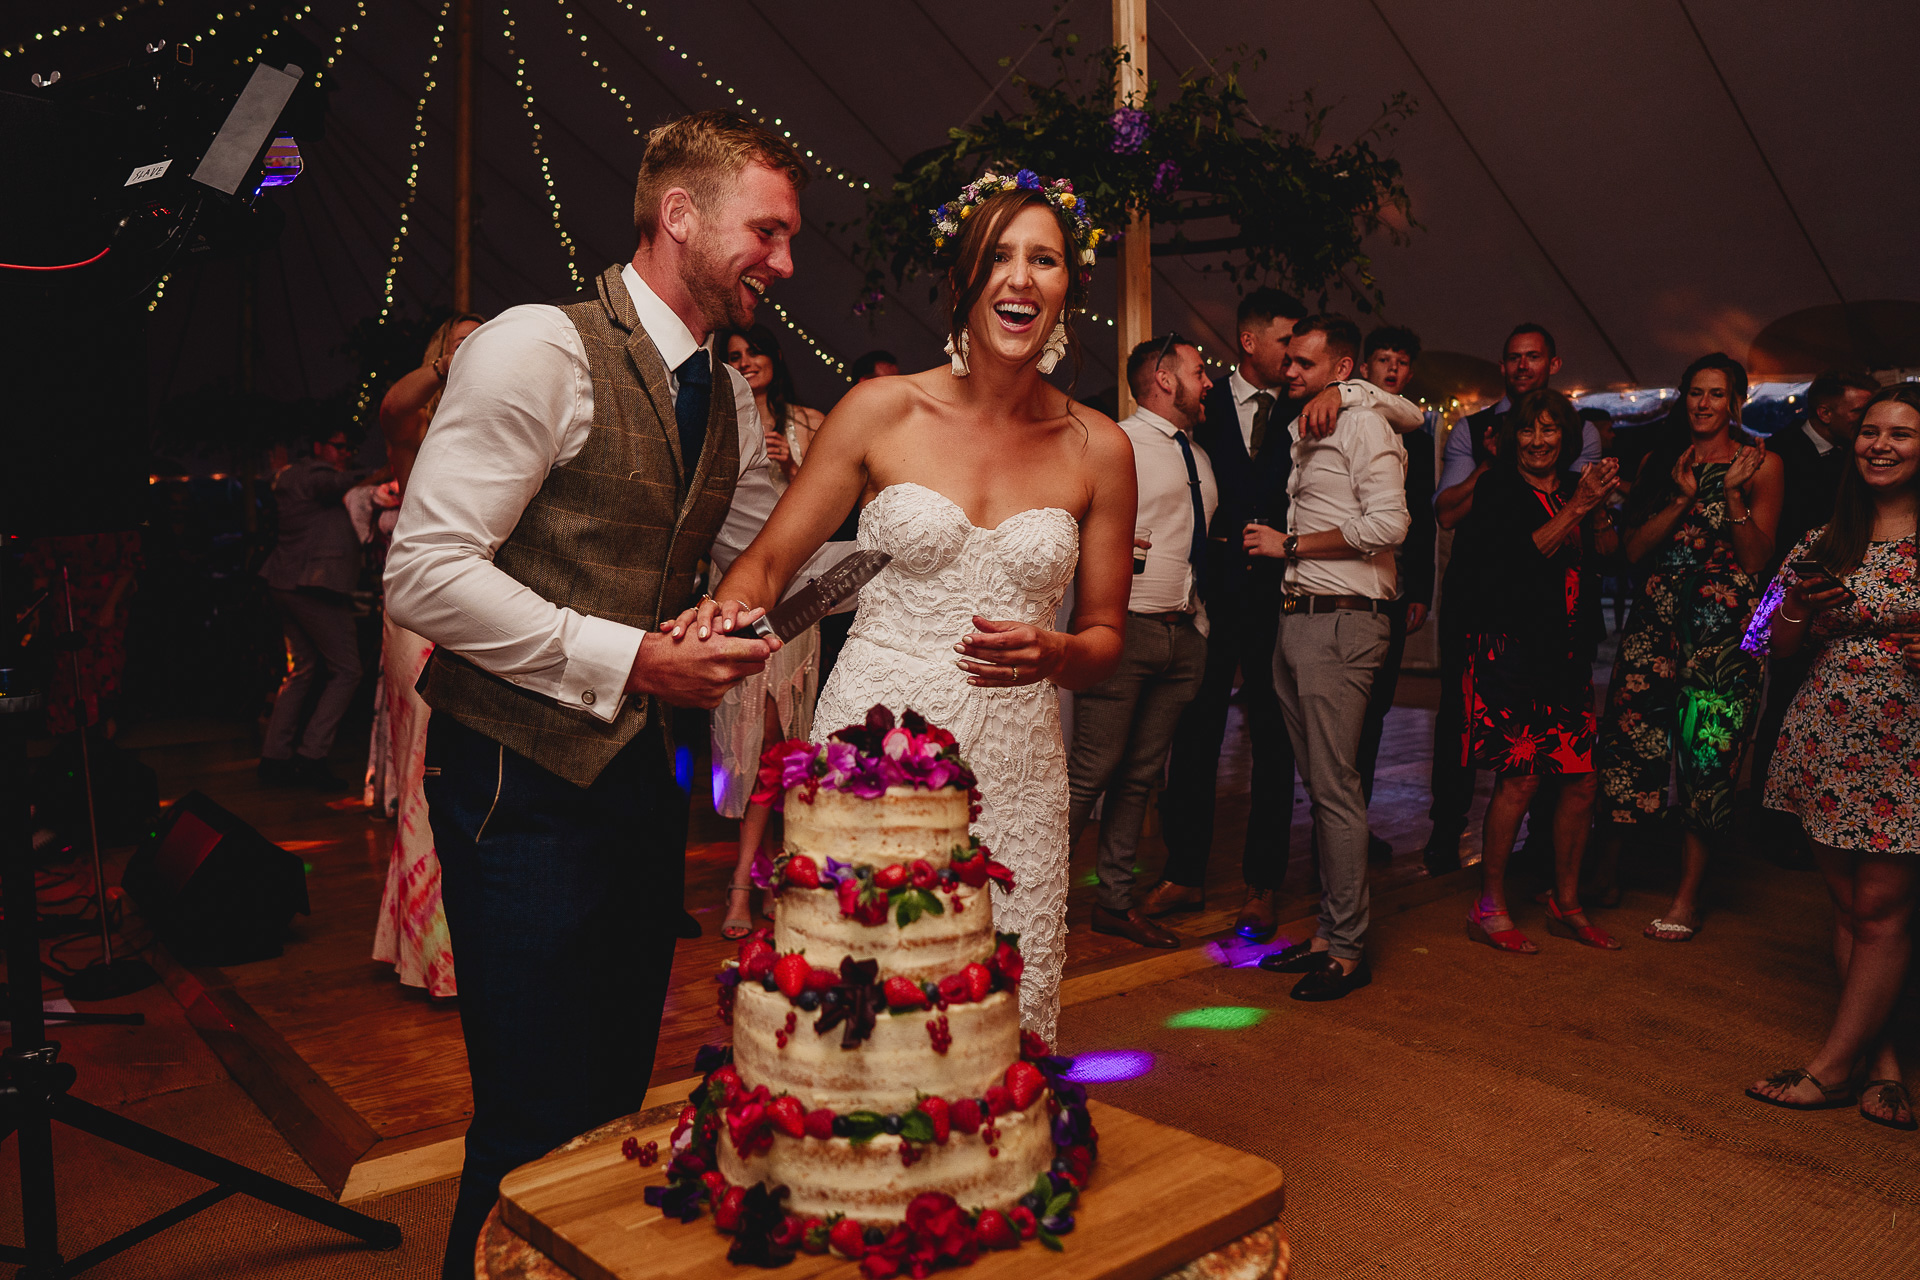 Bride and groom laughing cutting cake